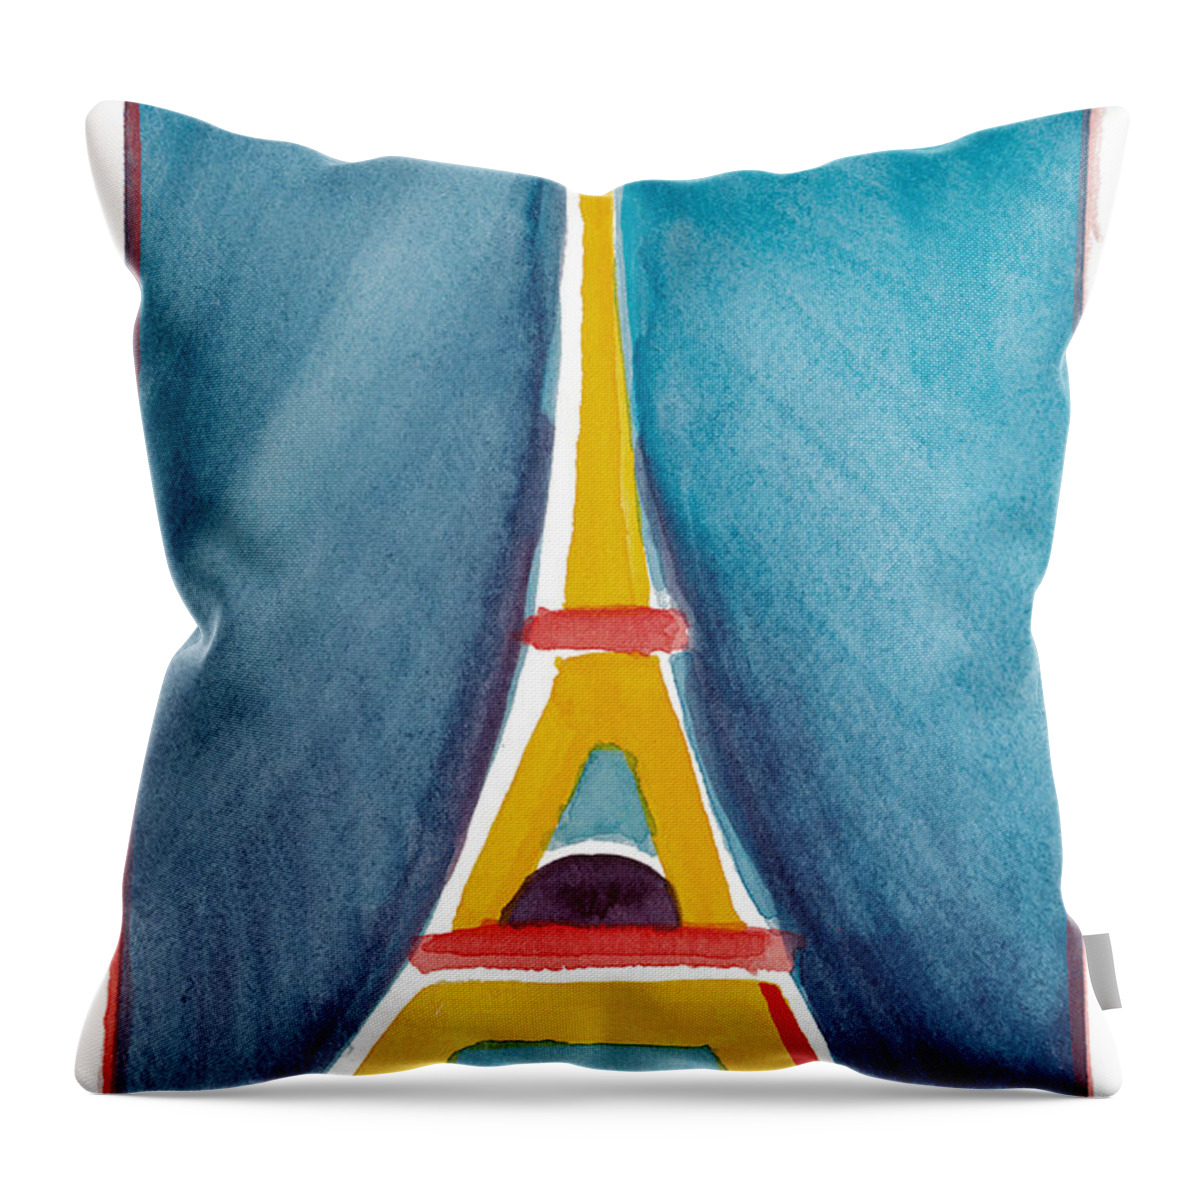 Aqua Throw Pillow featuring the painting Aqua Yellow Eiffel Tower by Robyn Saunders